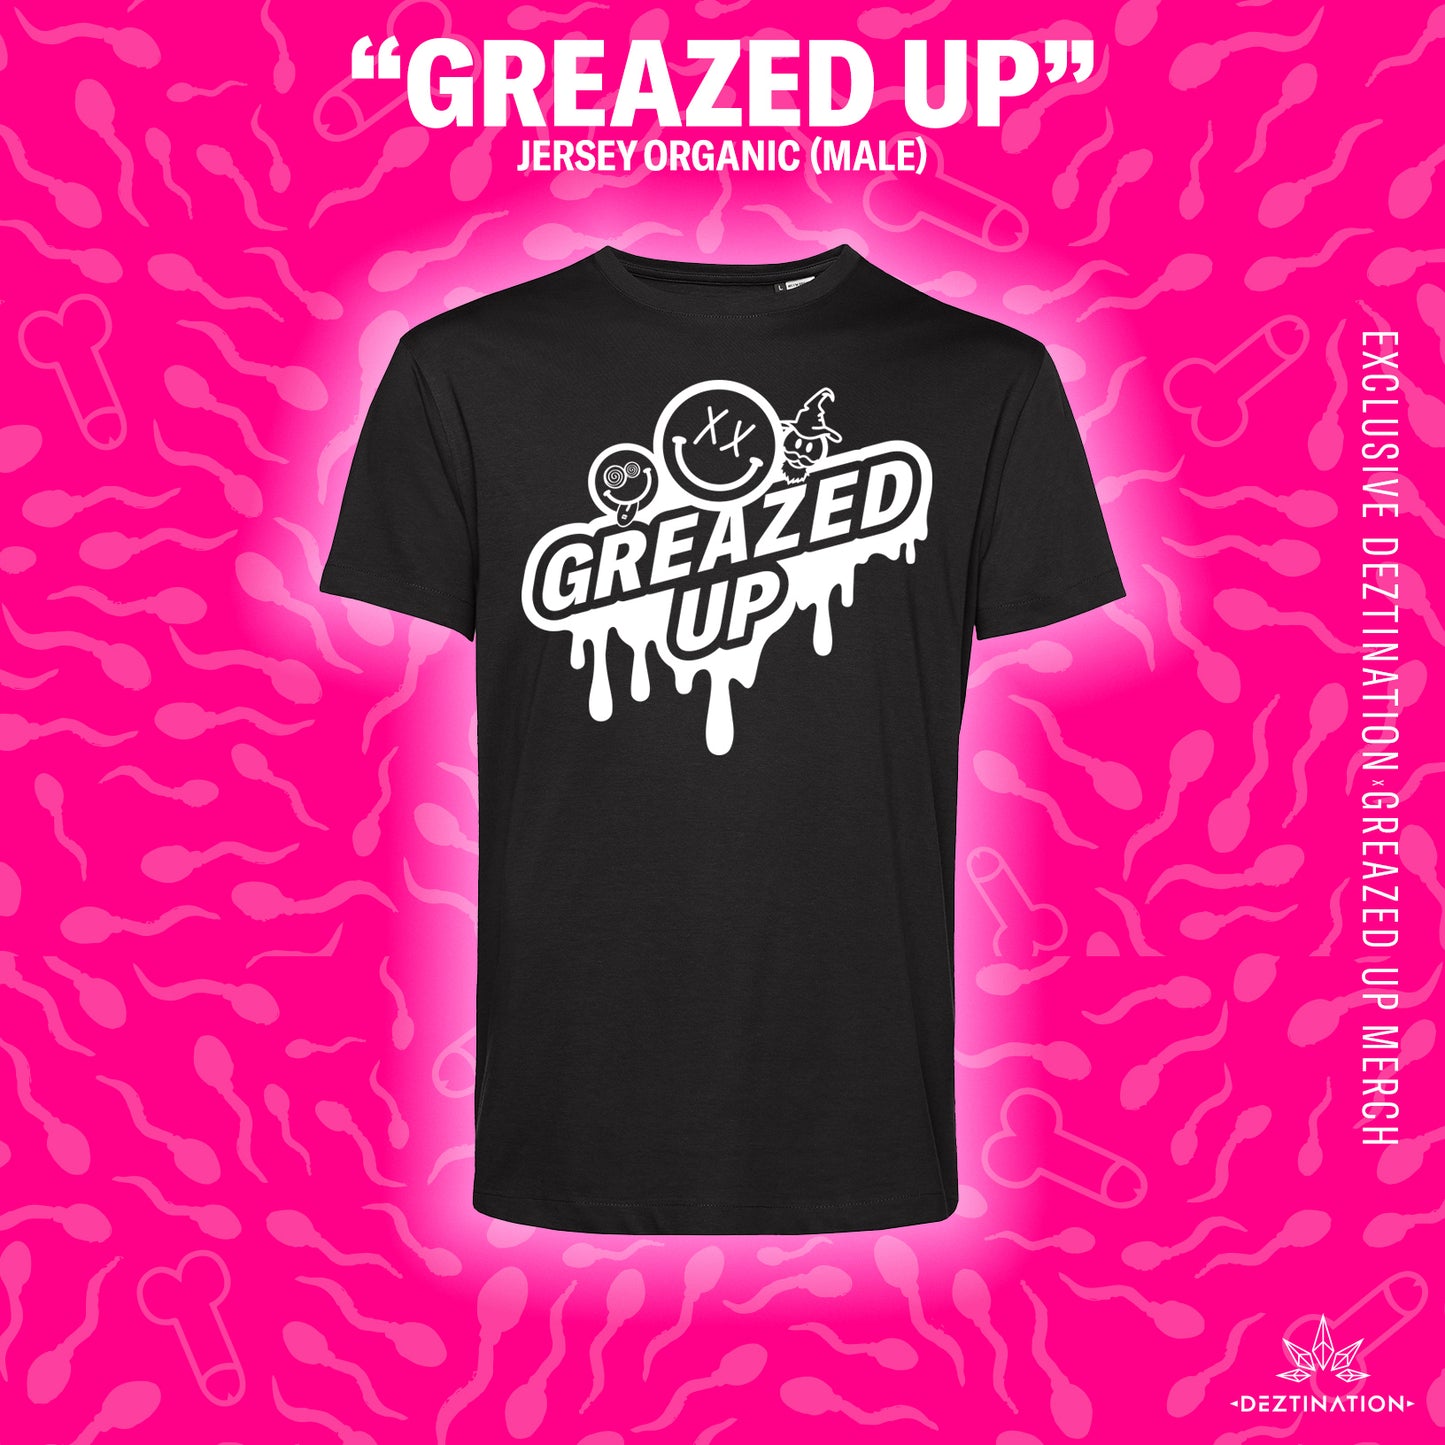 Greazed Up t-shirt (male)